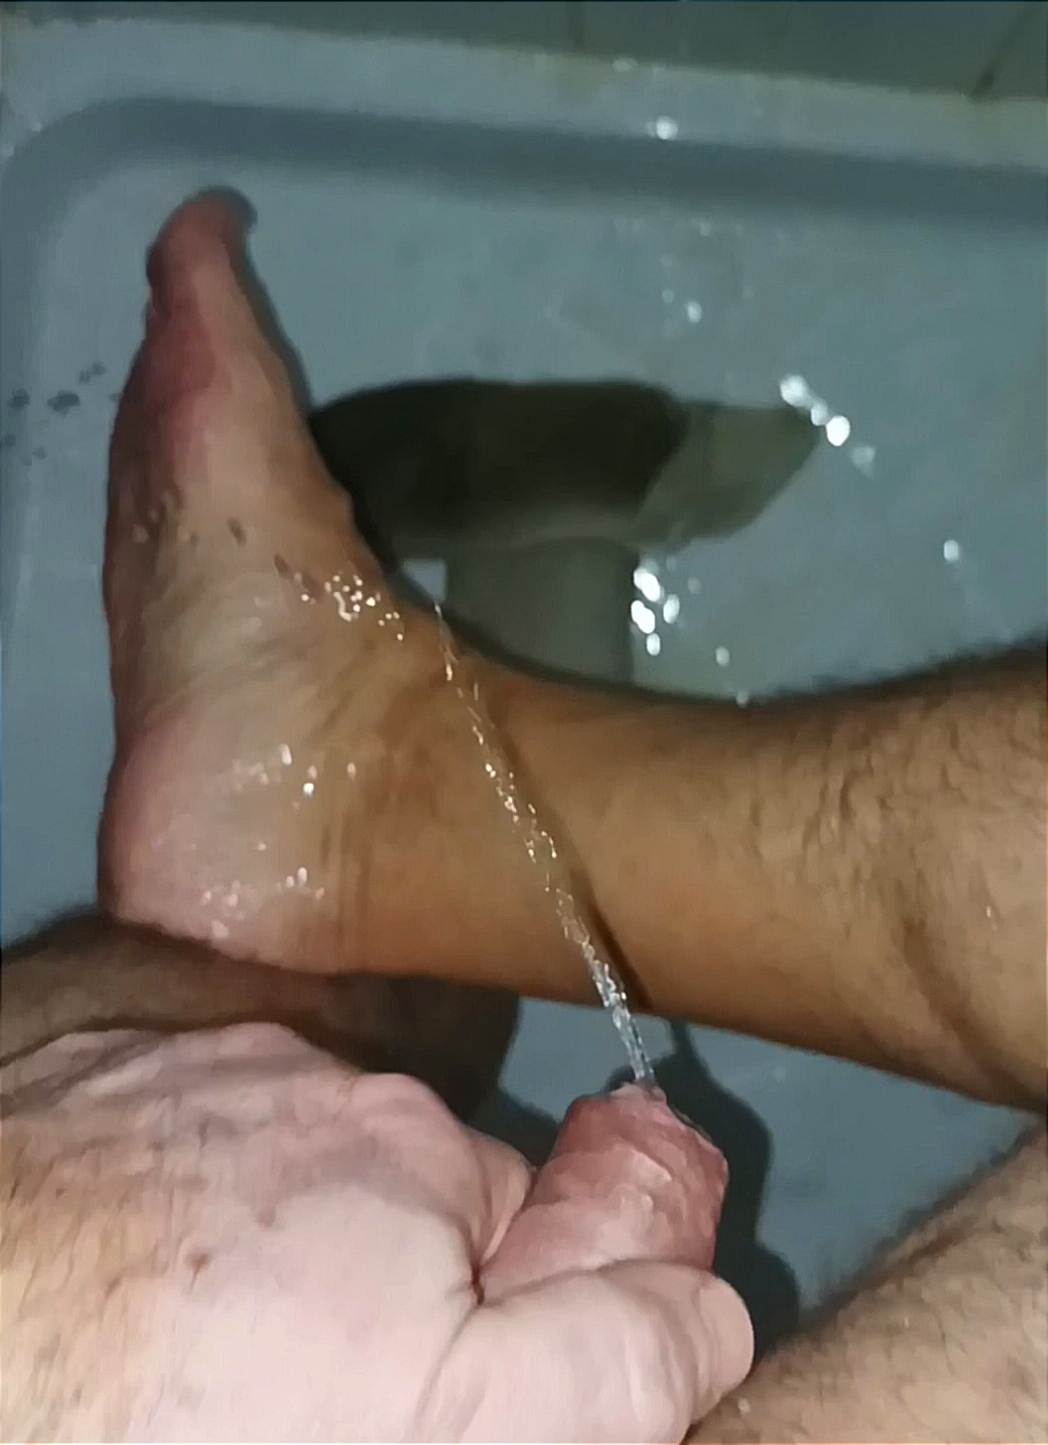 Pissing on my really dirty socks